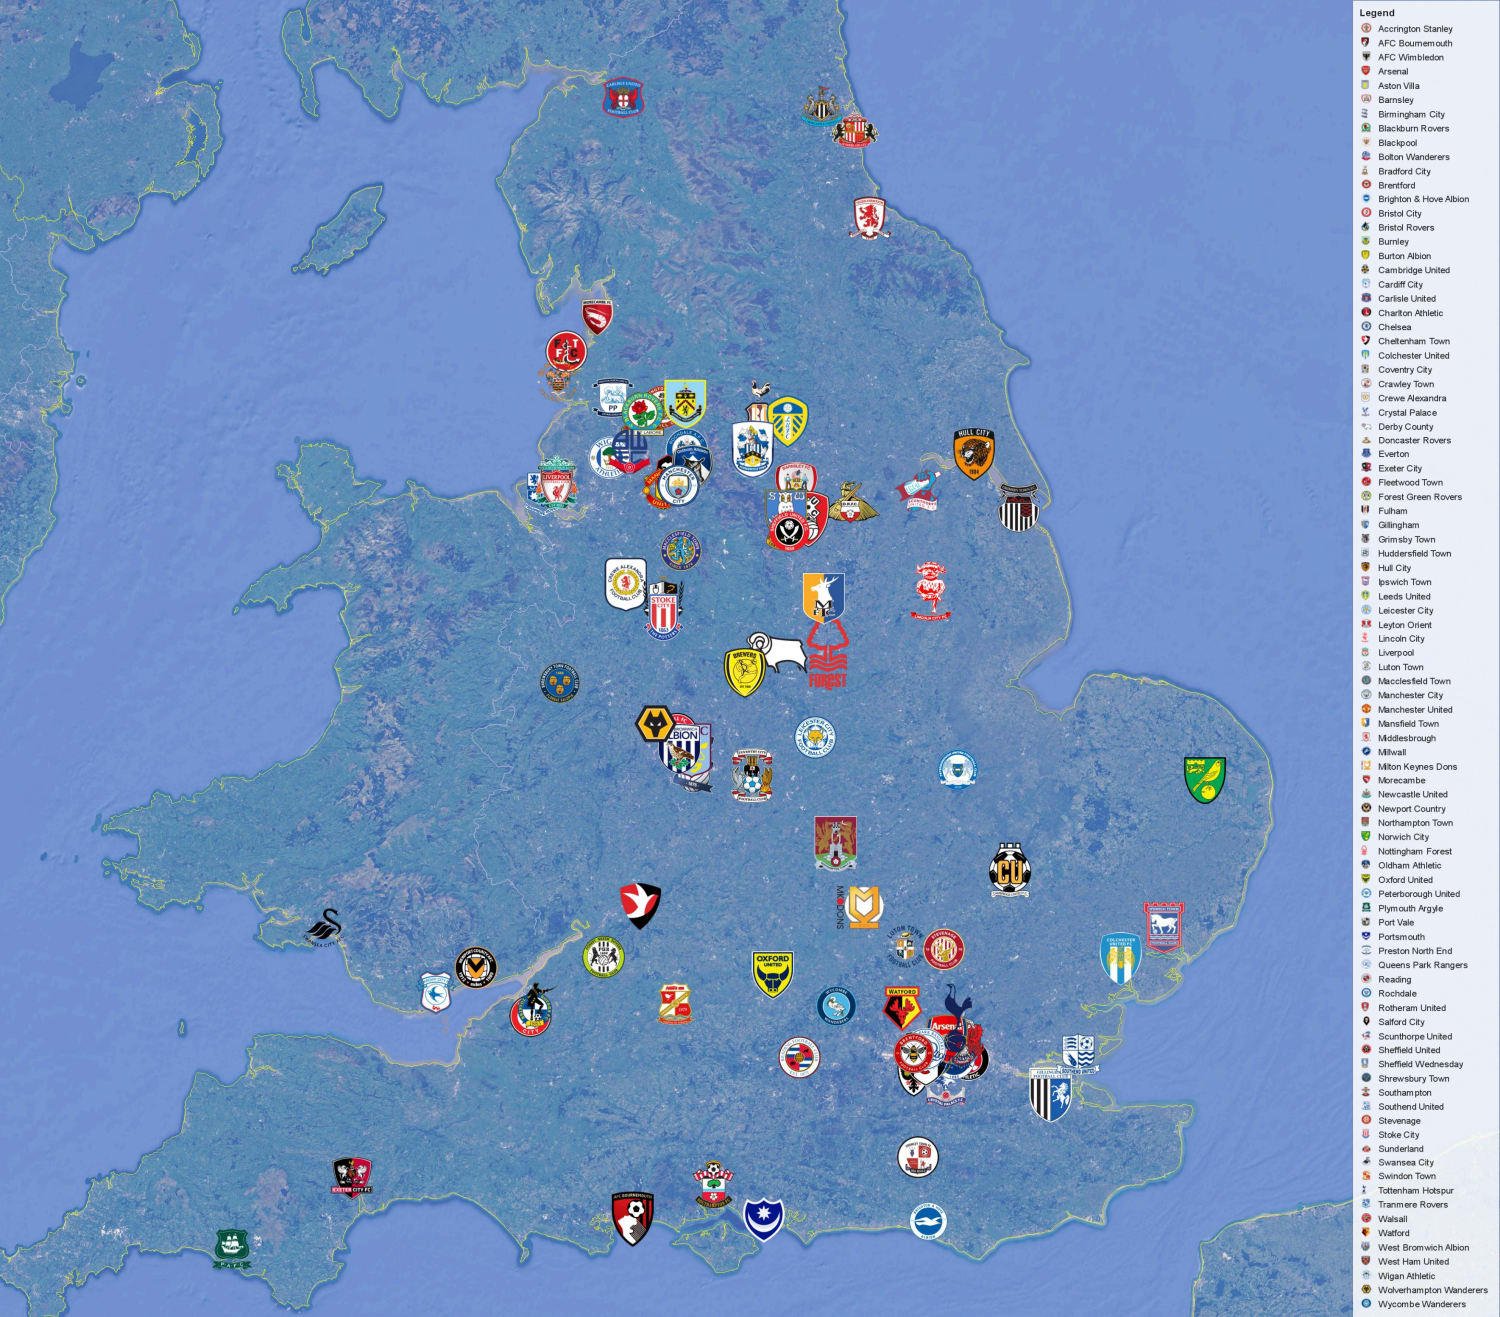 Map of the football clubs from England's top 4 divisions for the 2019/20 season